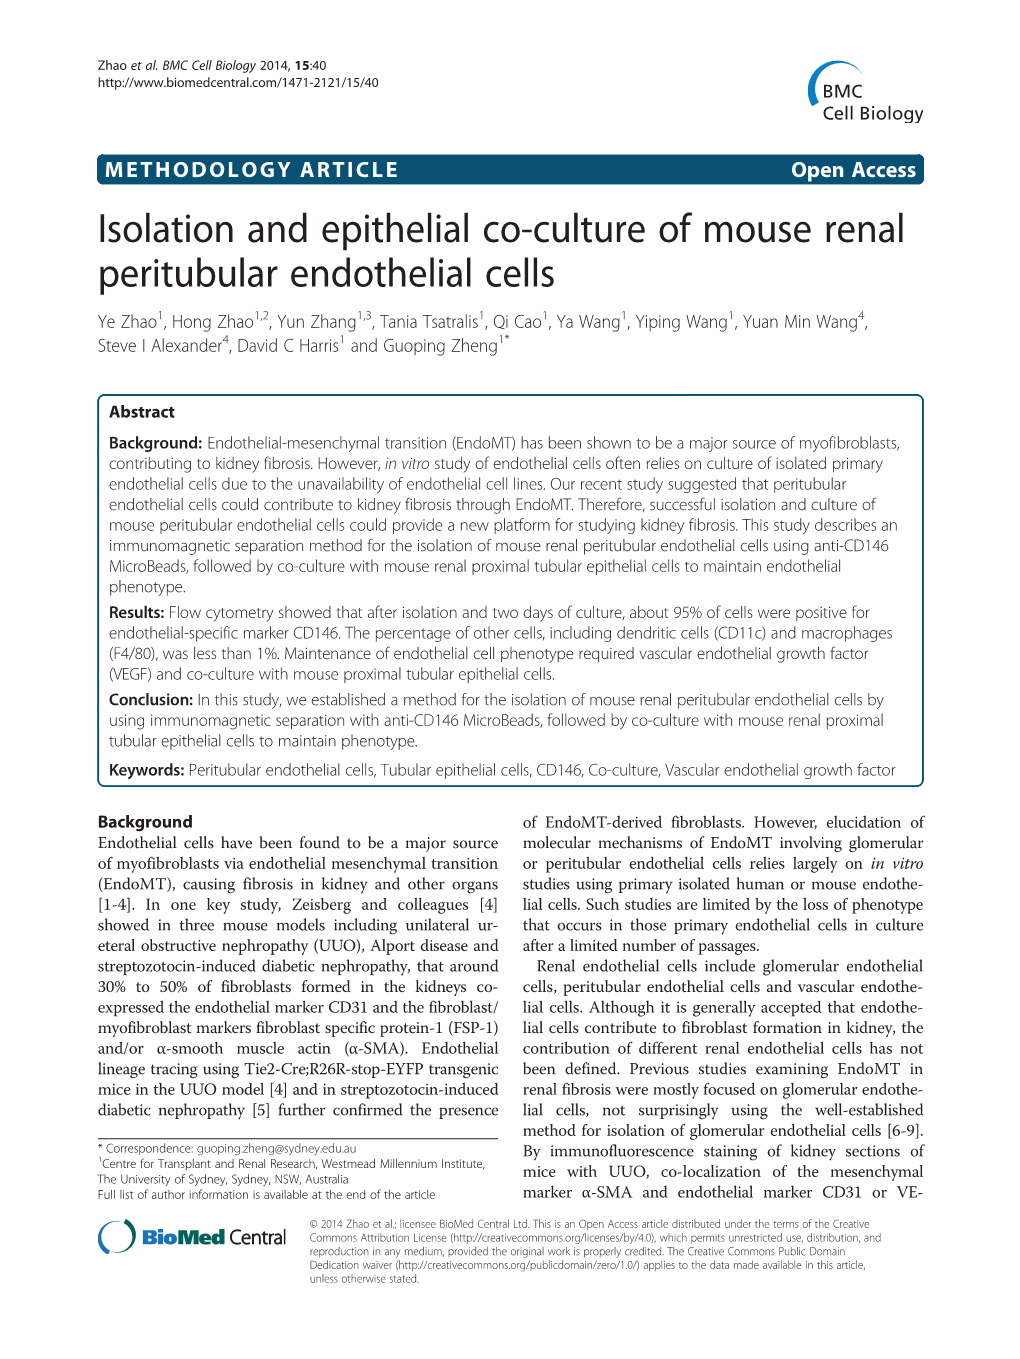 Isolation and Epithelial Co-Culture of Mouse Renal Peritubular Endothelial